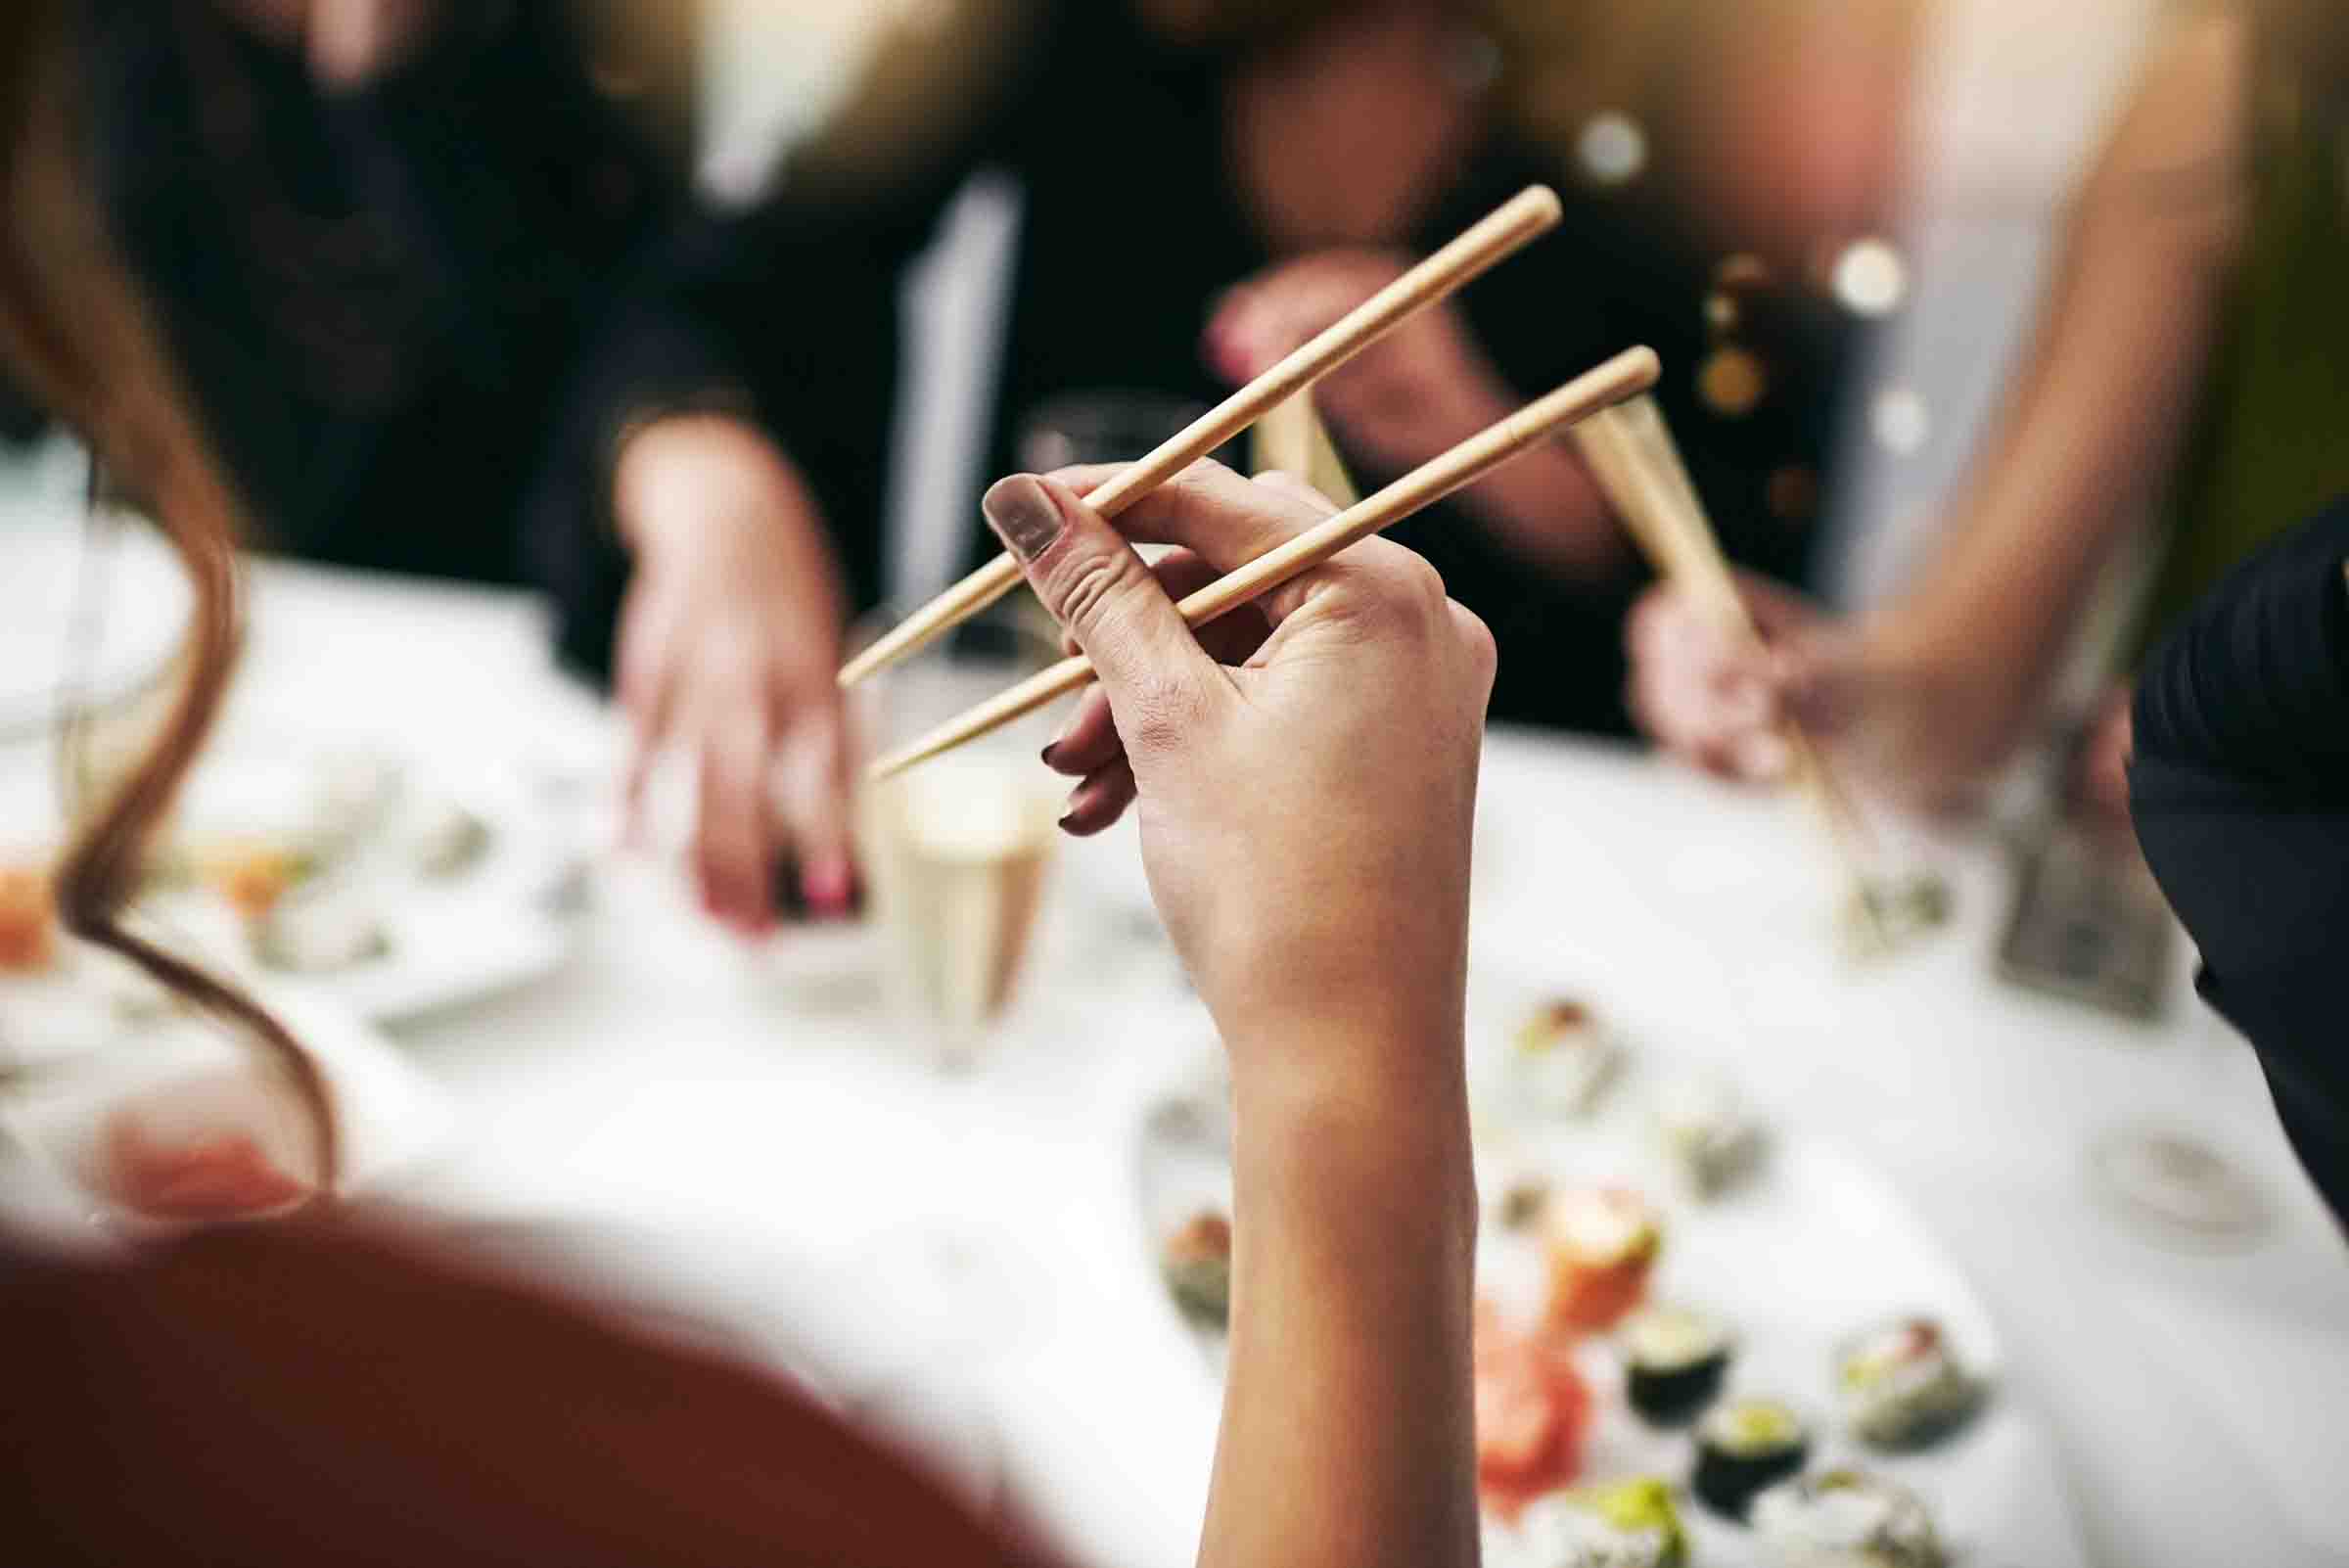 Woman eating with chopsticks